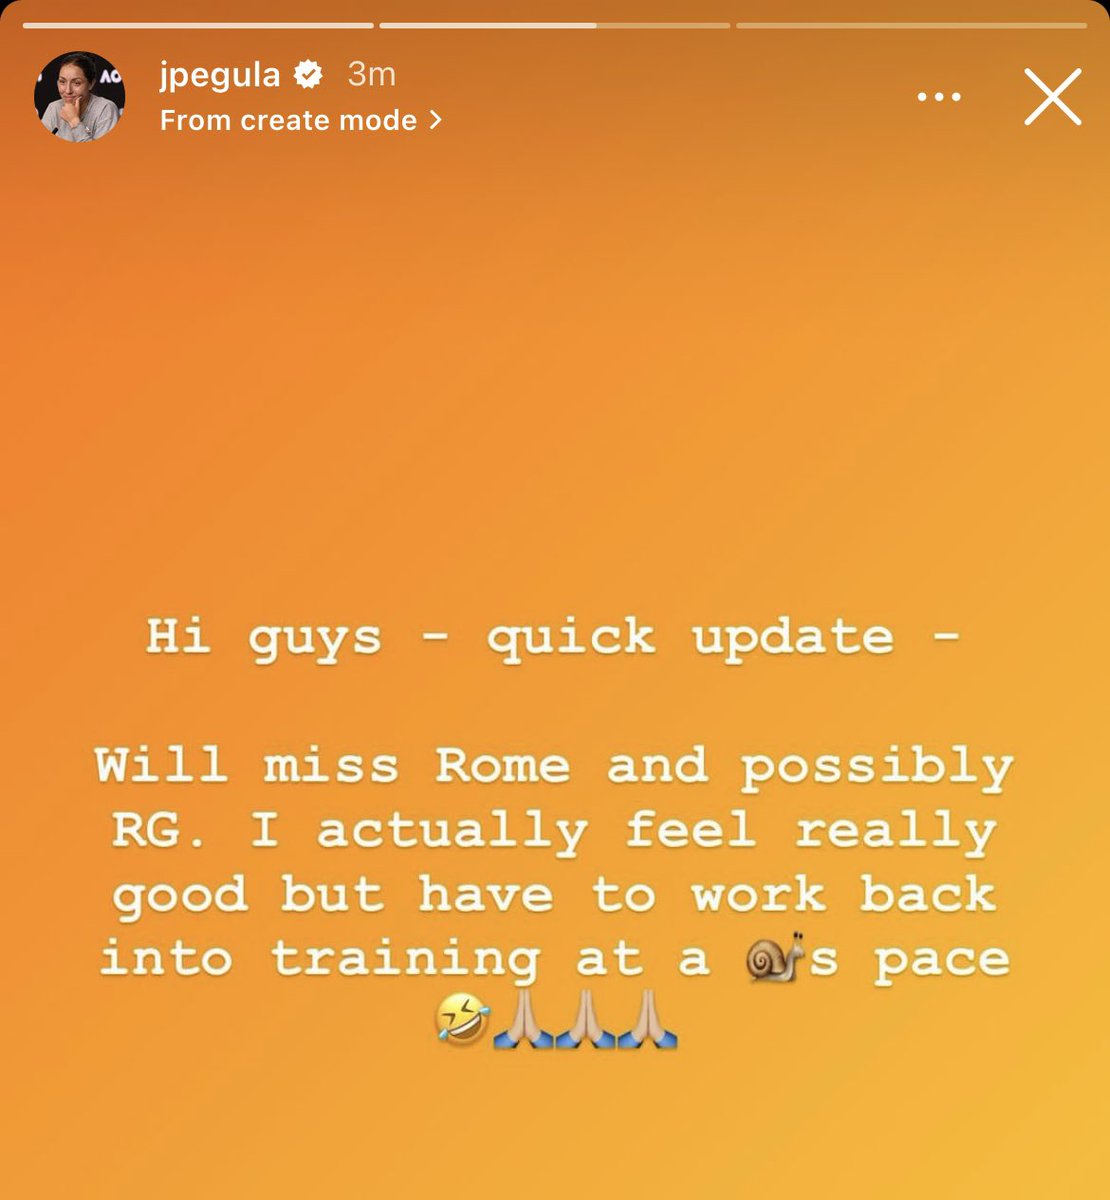 Jessica Pegula says she may possibly miss Roland Garros as returning to training is proceeding at a slow pace